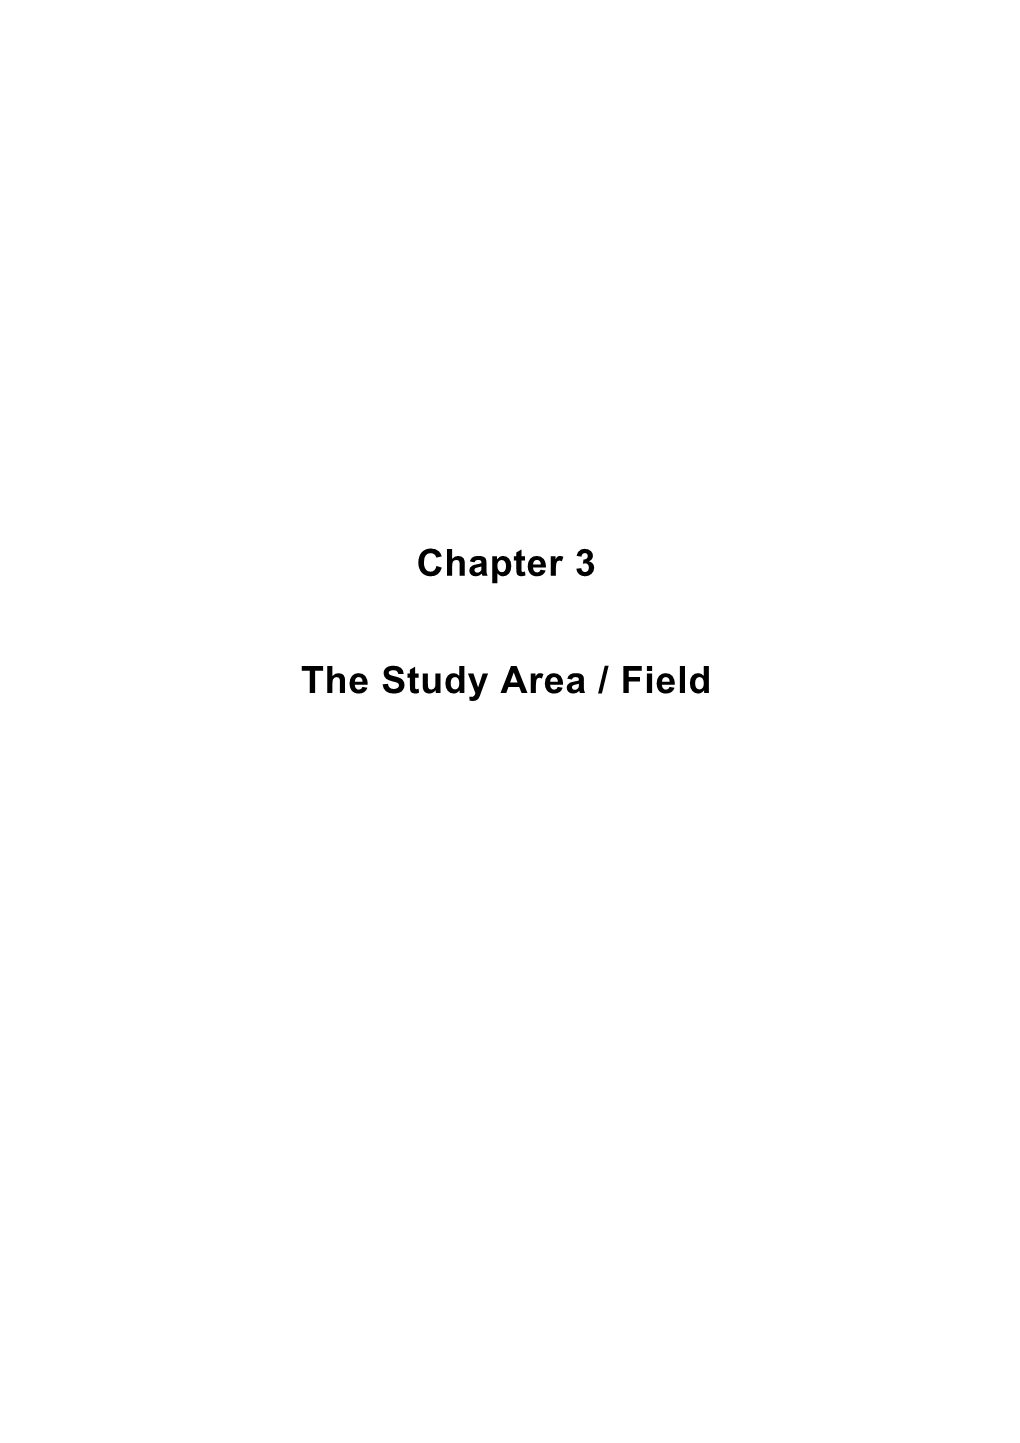 Chapter 3 the Study Area / Field